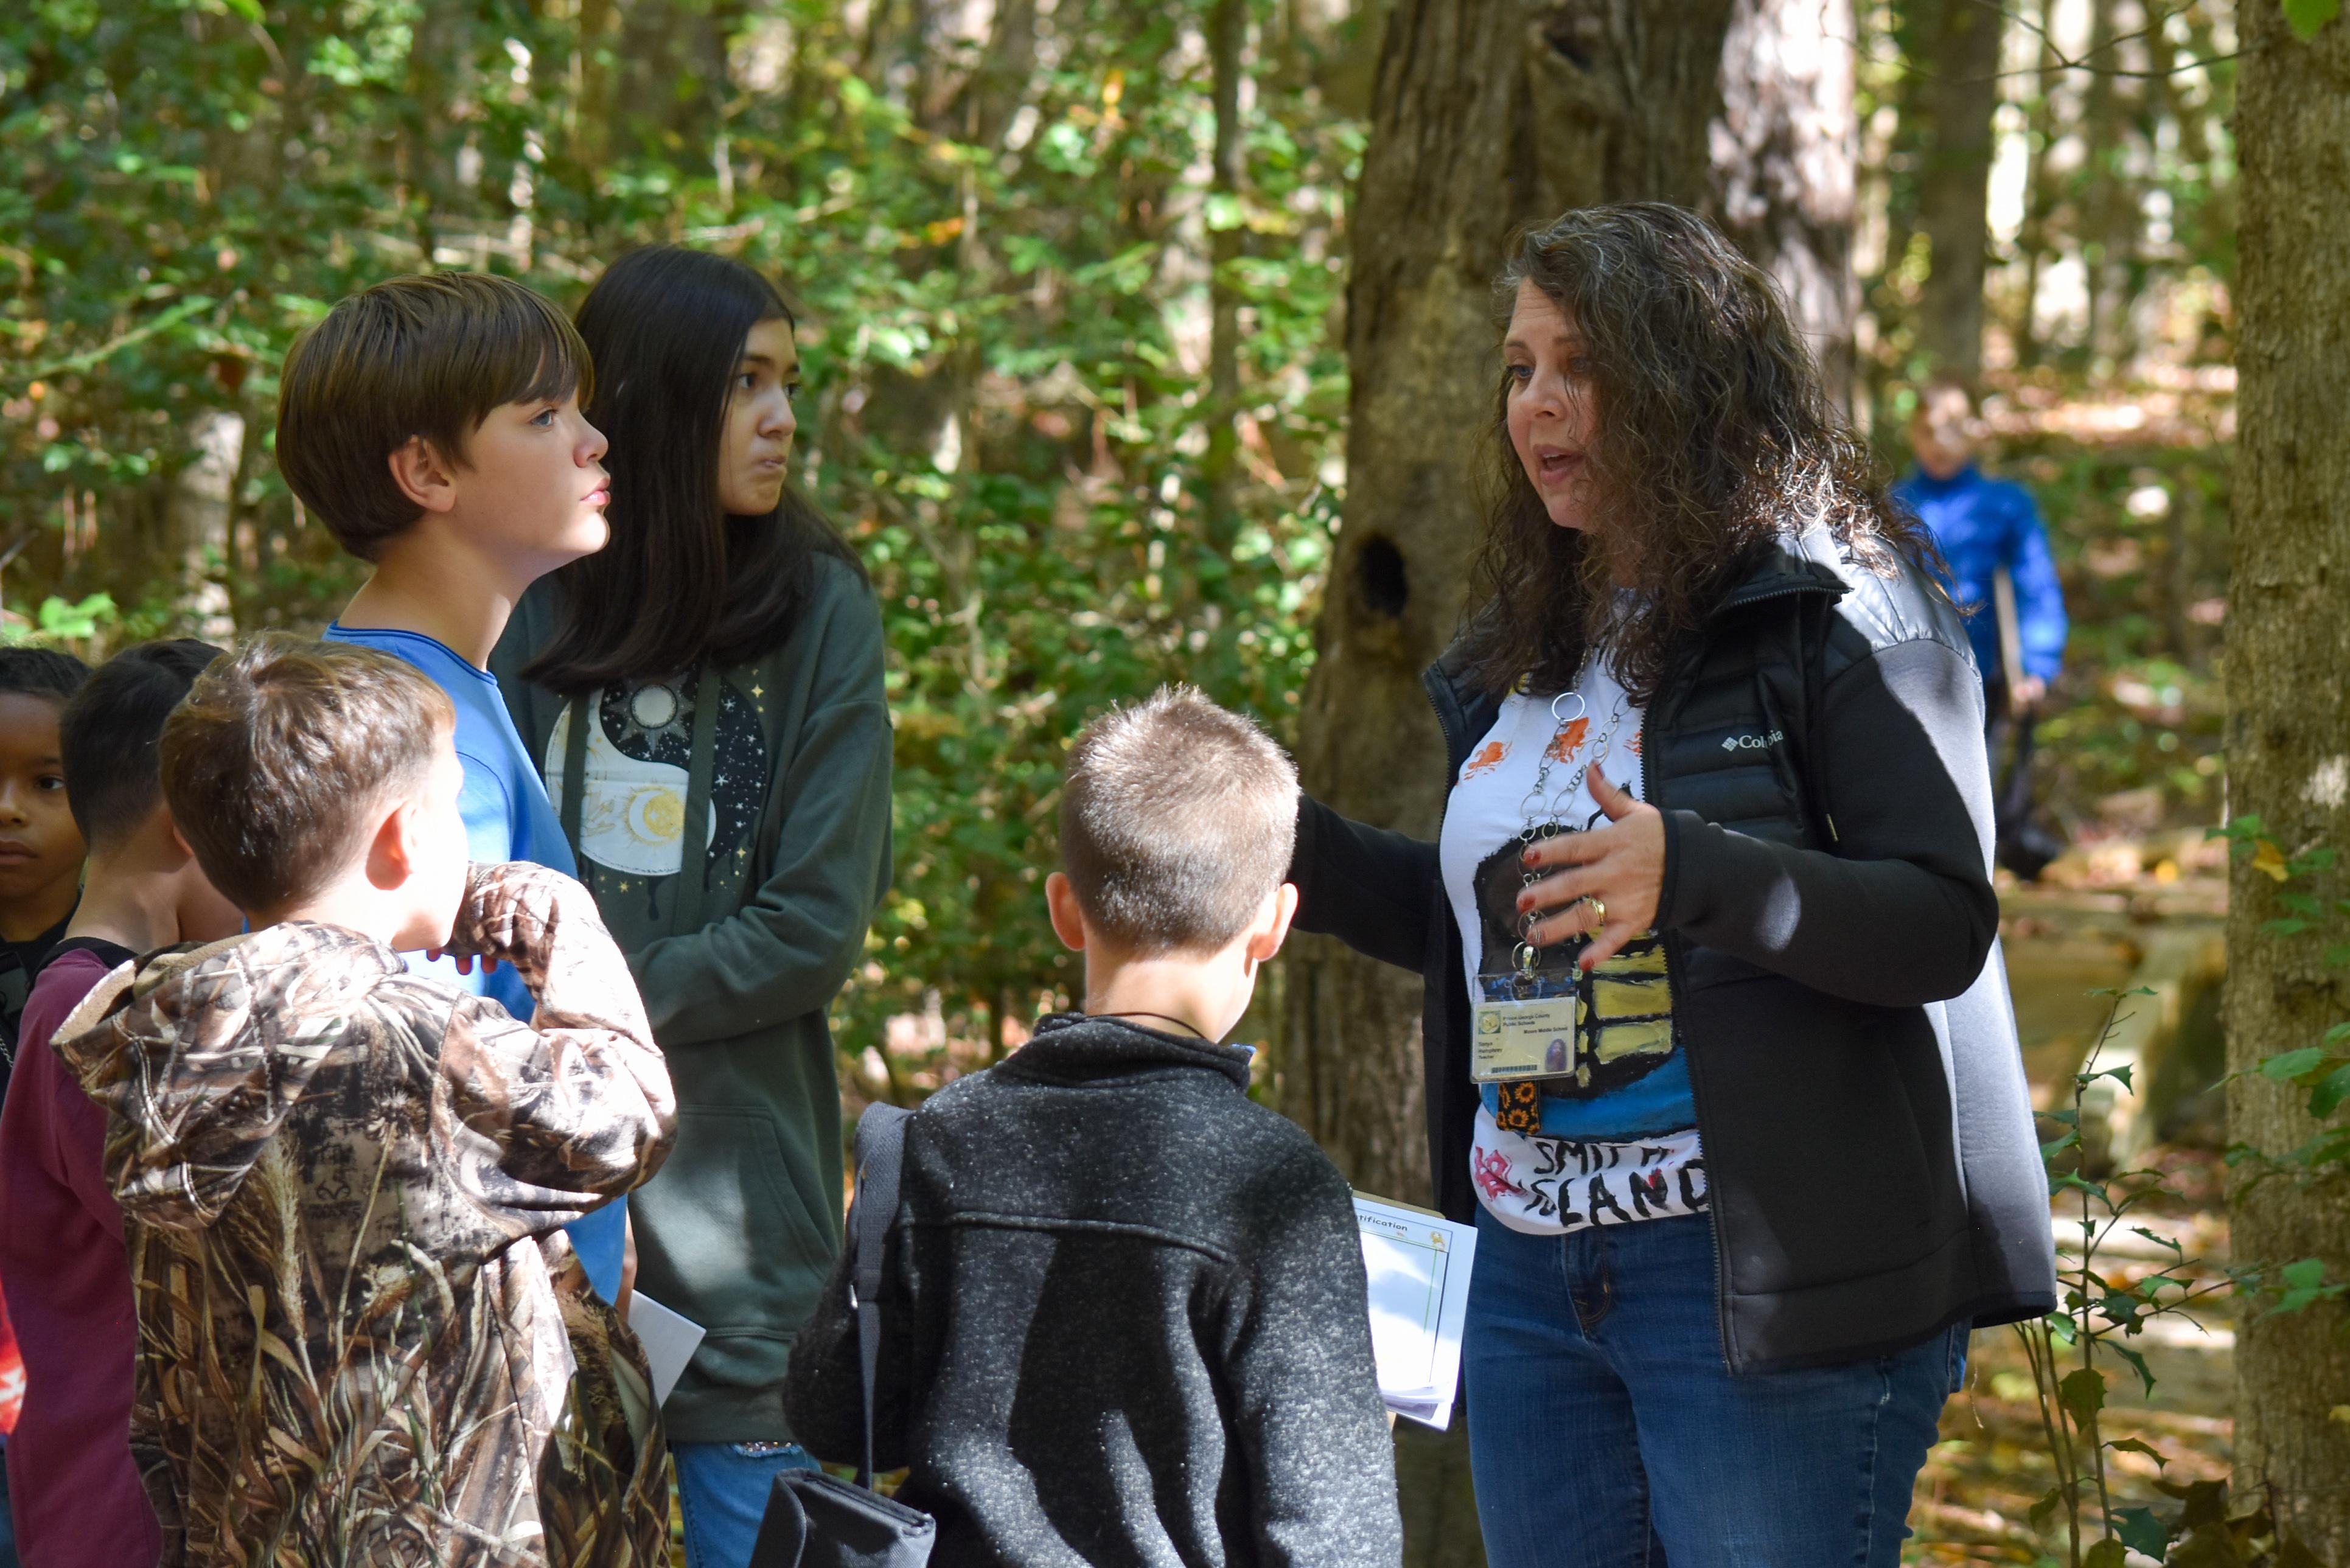 Another teacher explains ecology concepts while along the trail with students